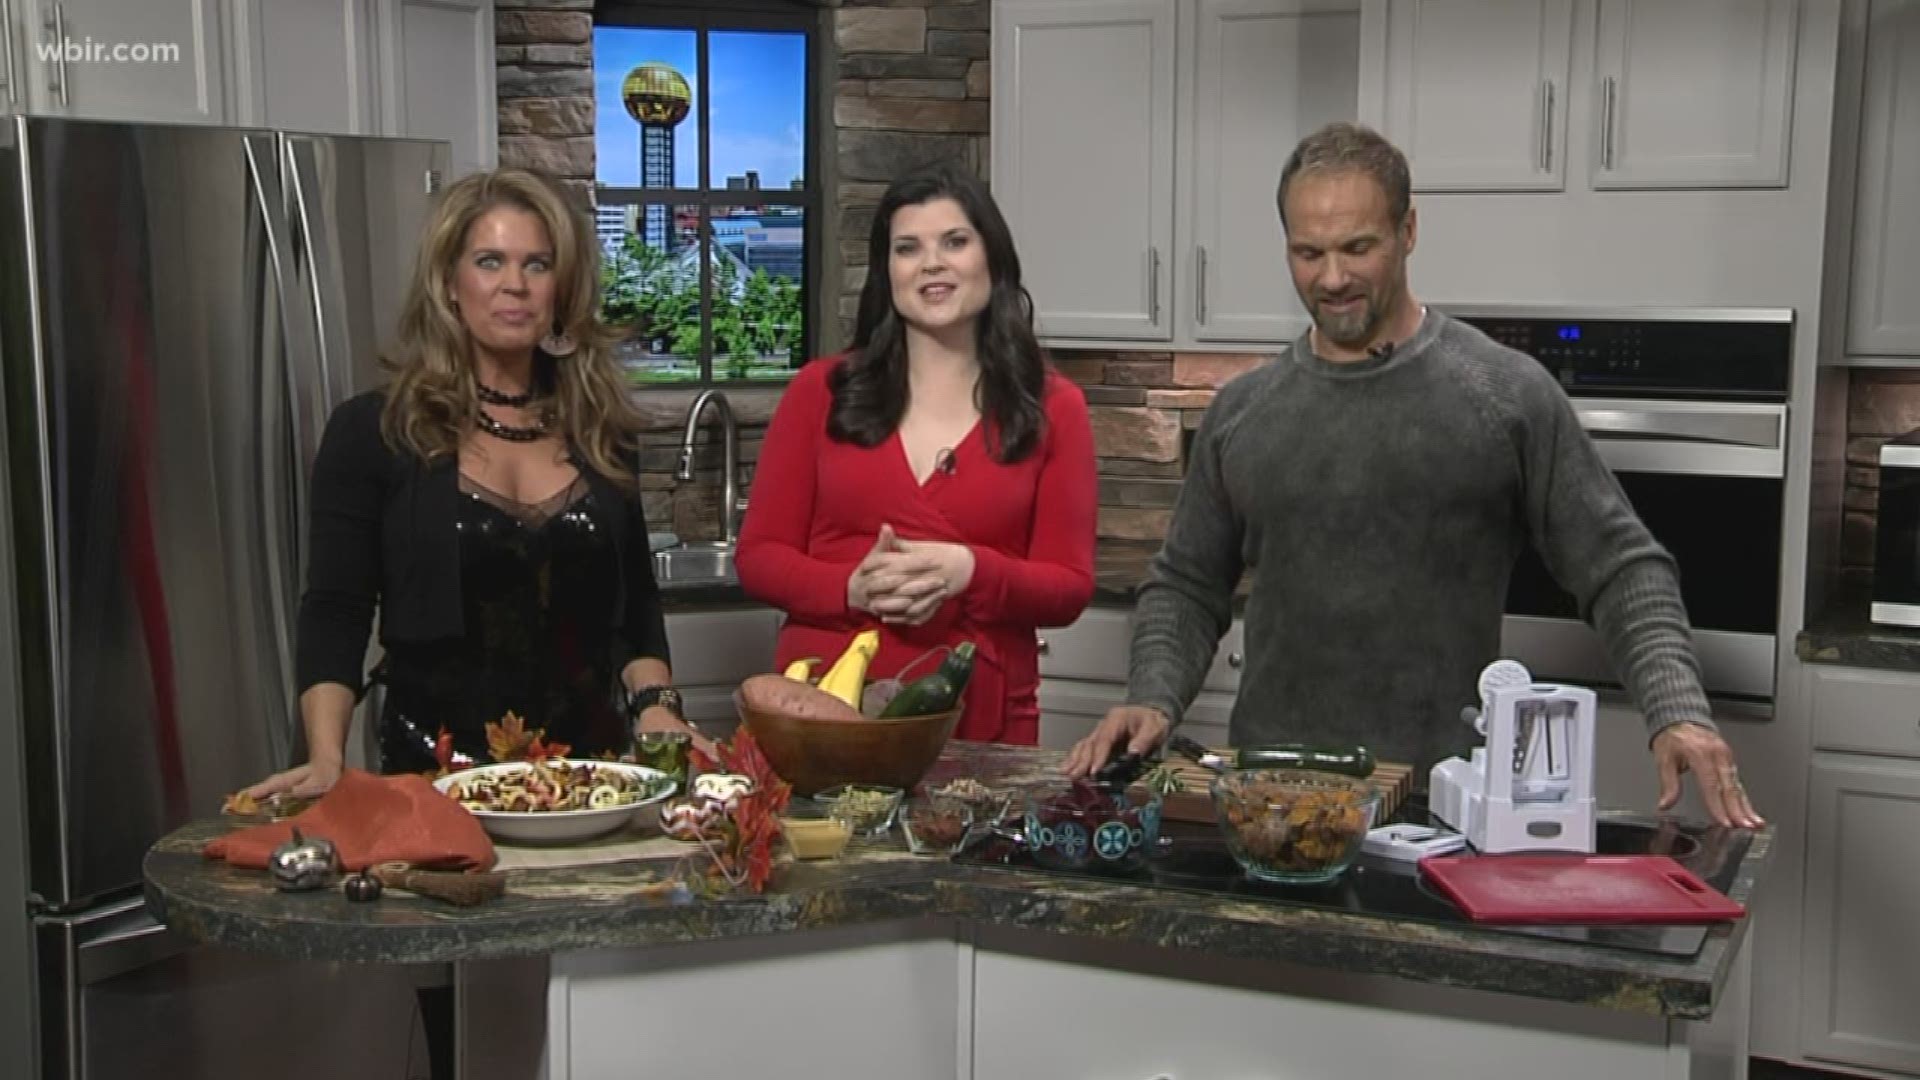 Scott and Michelle Williams with Totality Living Well are here with us in the kitchen with a budget-friendly twist on a seasonal vegetable meal.